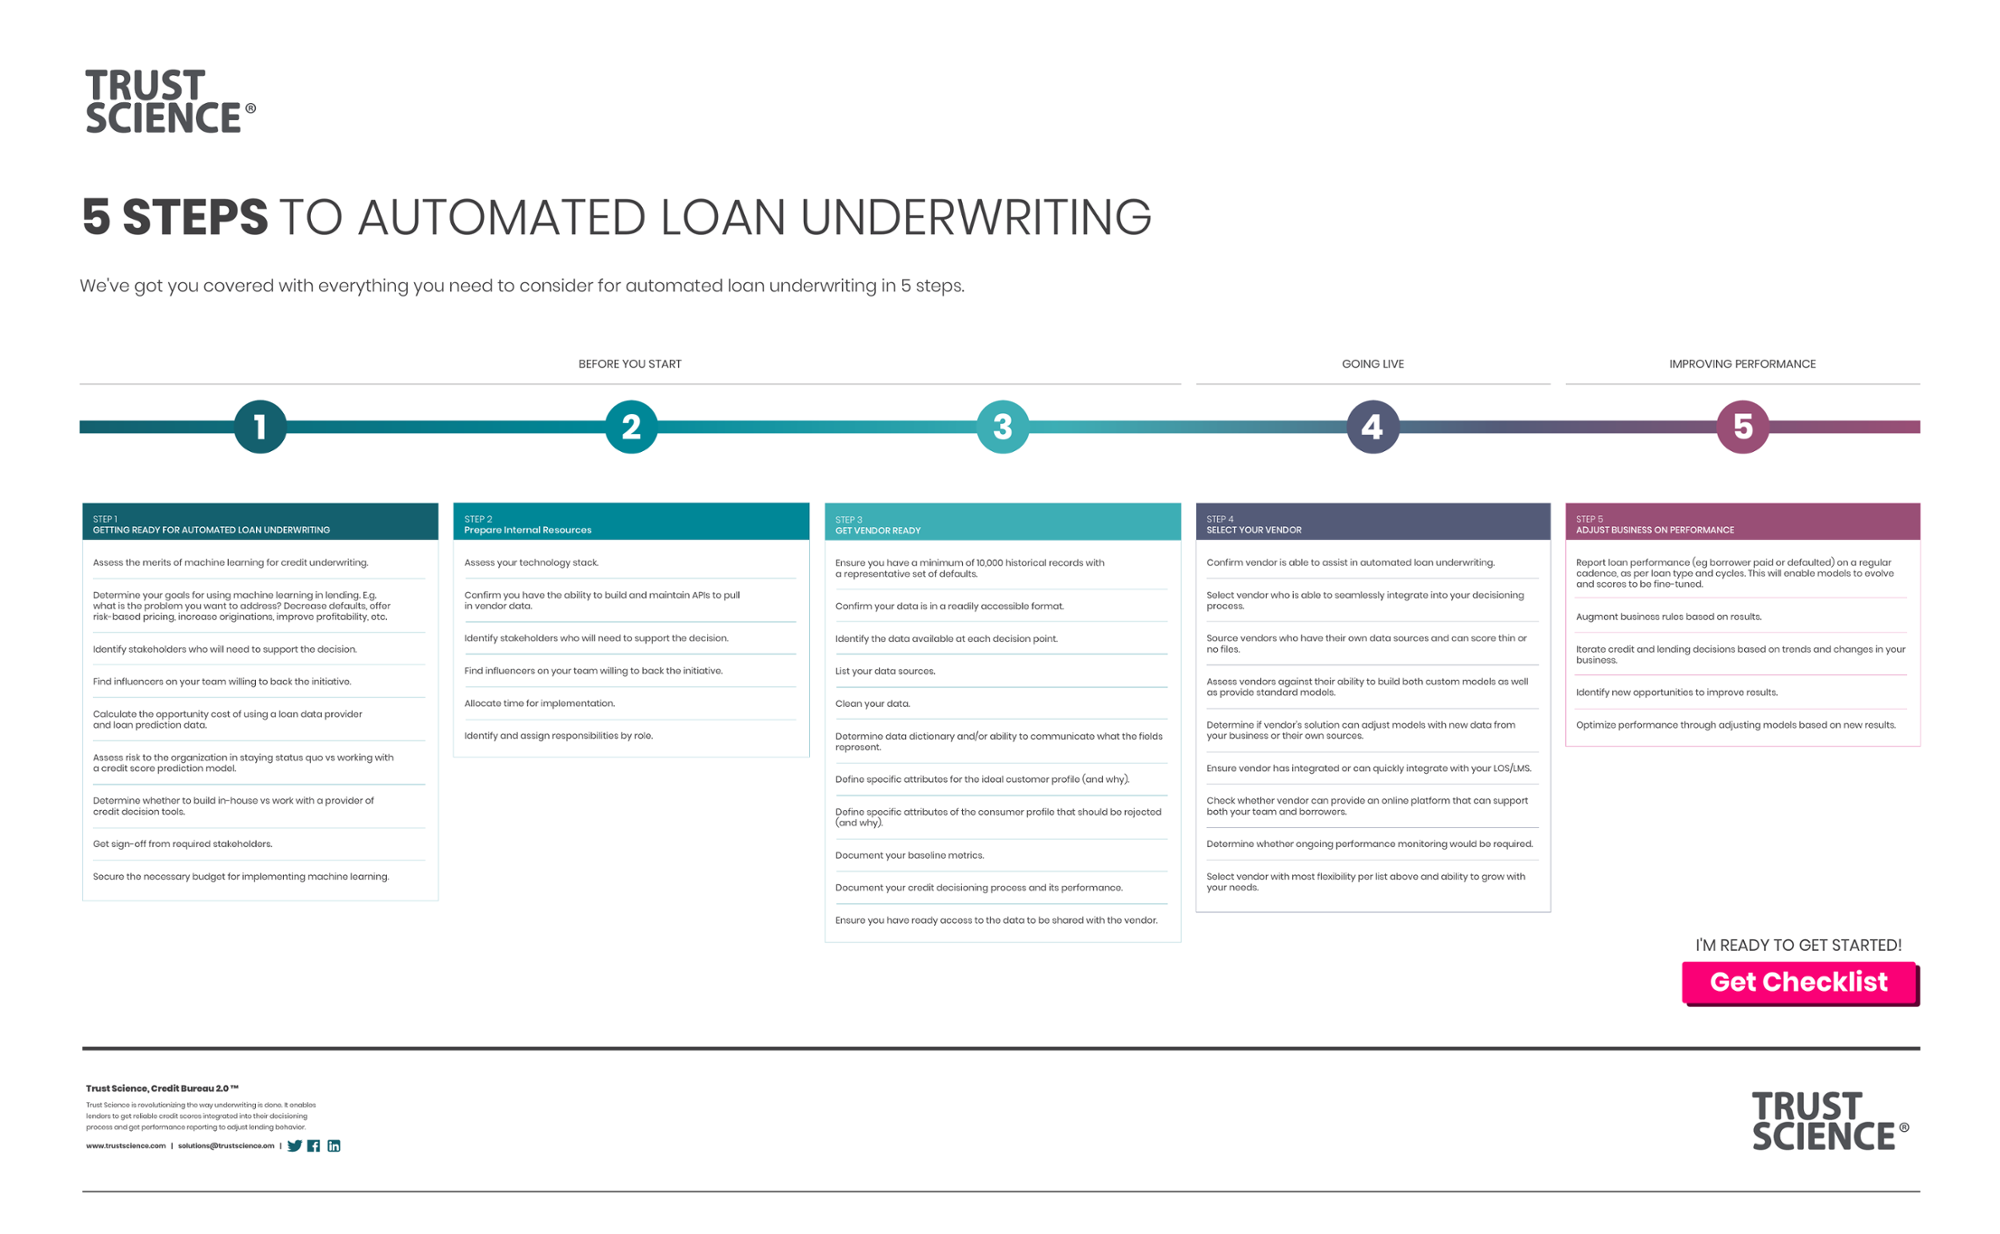 5 Steps to Automated Loan Underwriting Infographic 2